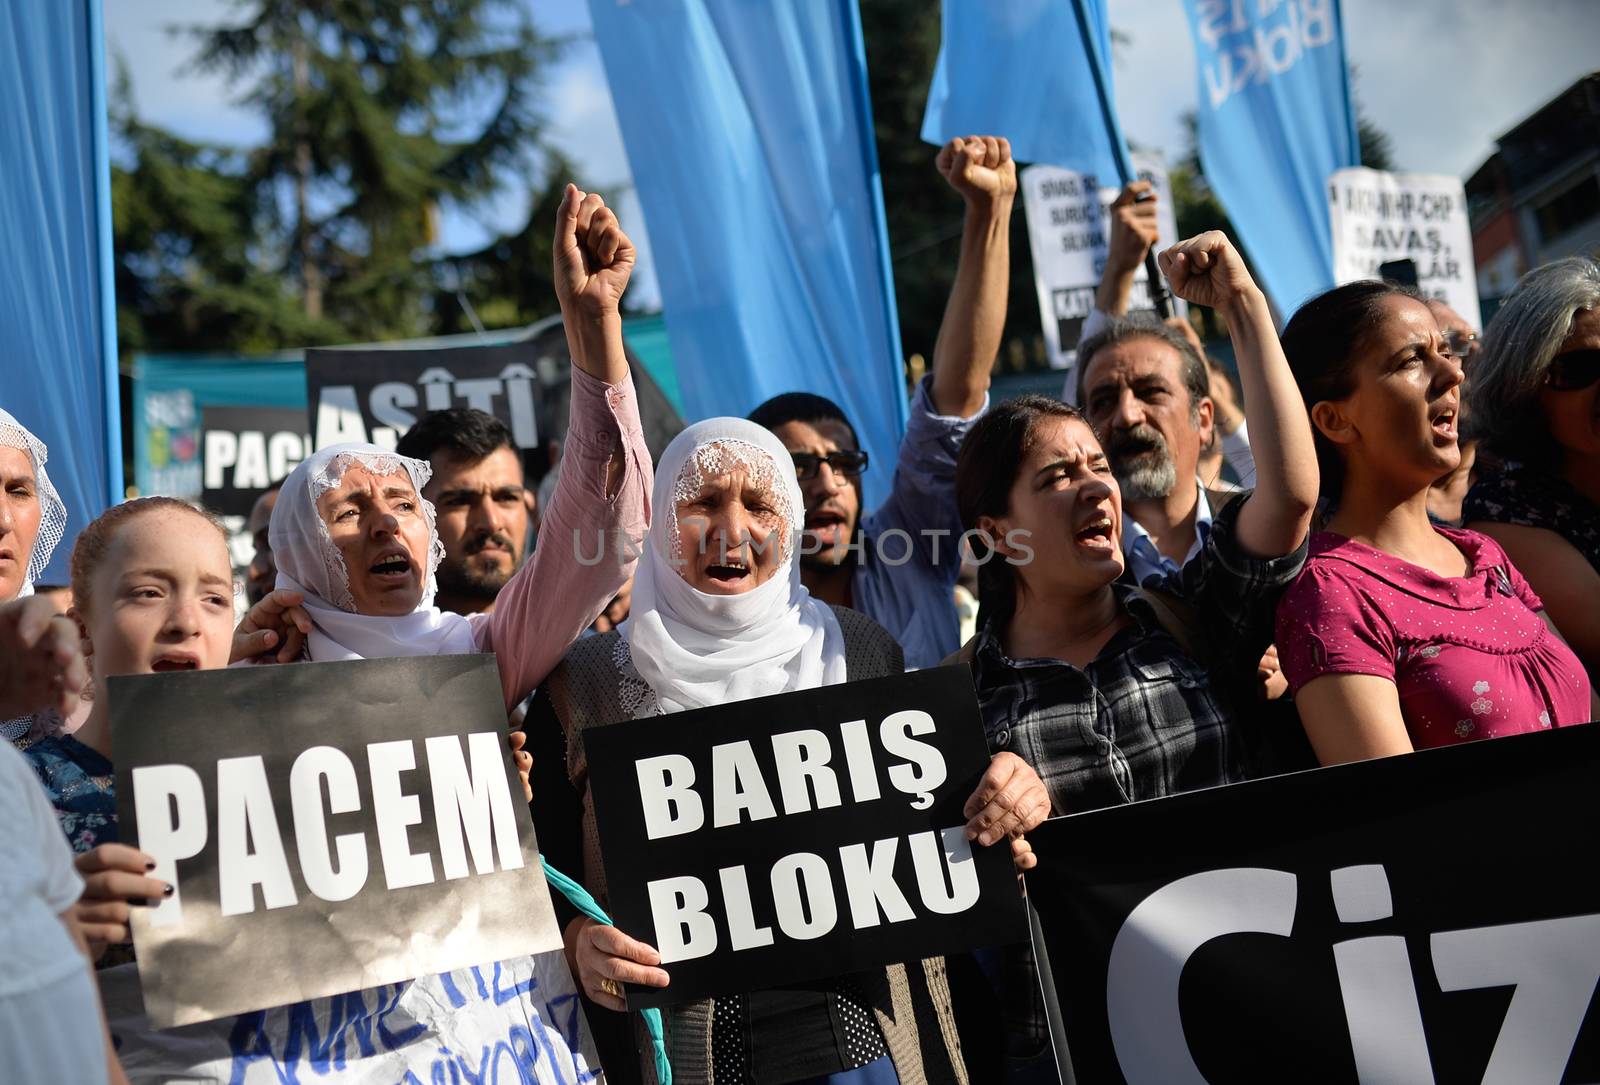 TURKEY, Istanbul: Kurdish community members and supporters hold a protest in Istanbul on Sept. 13, 2015 to call for an end to a recent government operation against Kurdish militants in Cizre. The predominantly Kurdish neighborhood that has been under heavy attack recently, resulting in many civilian deaths. 